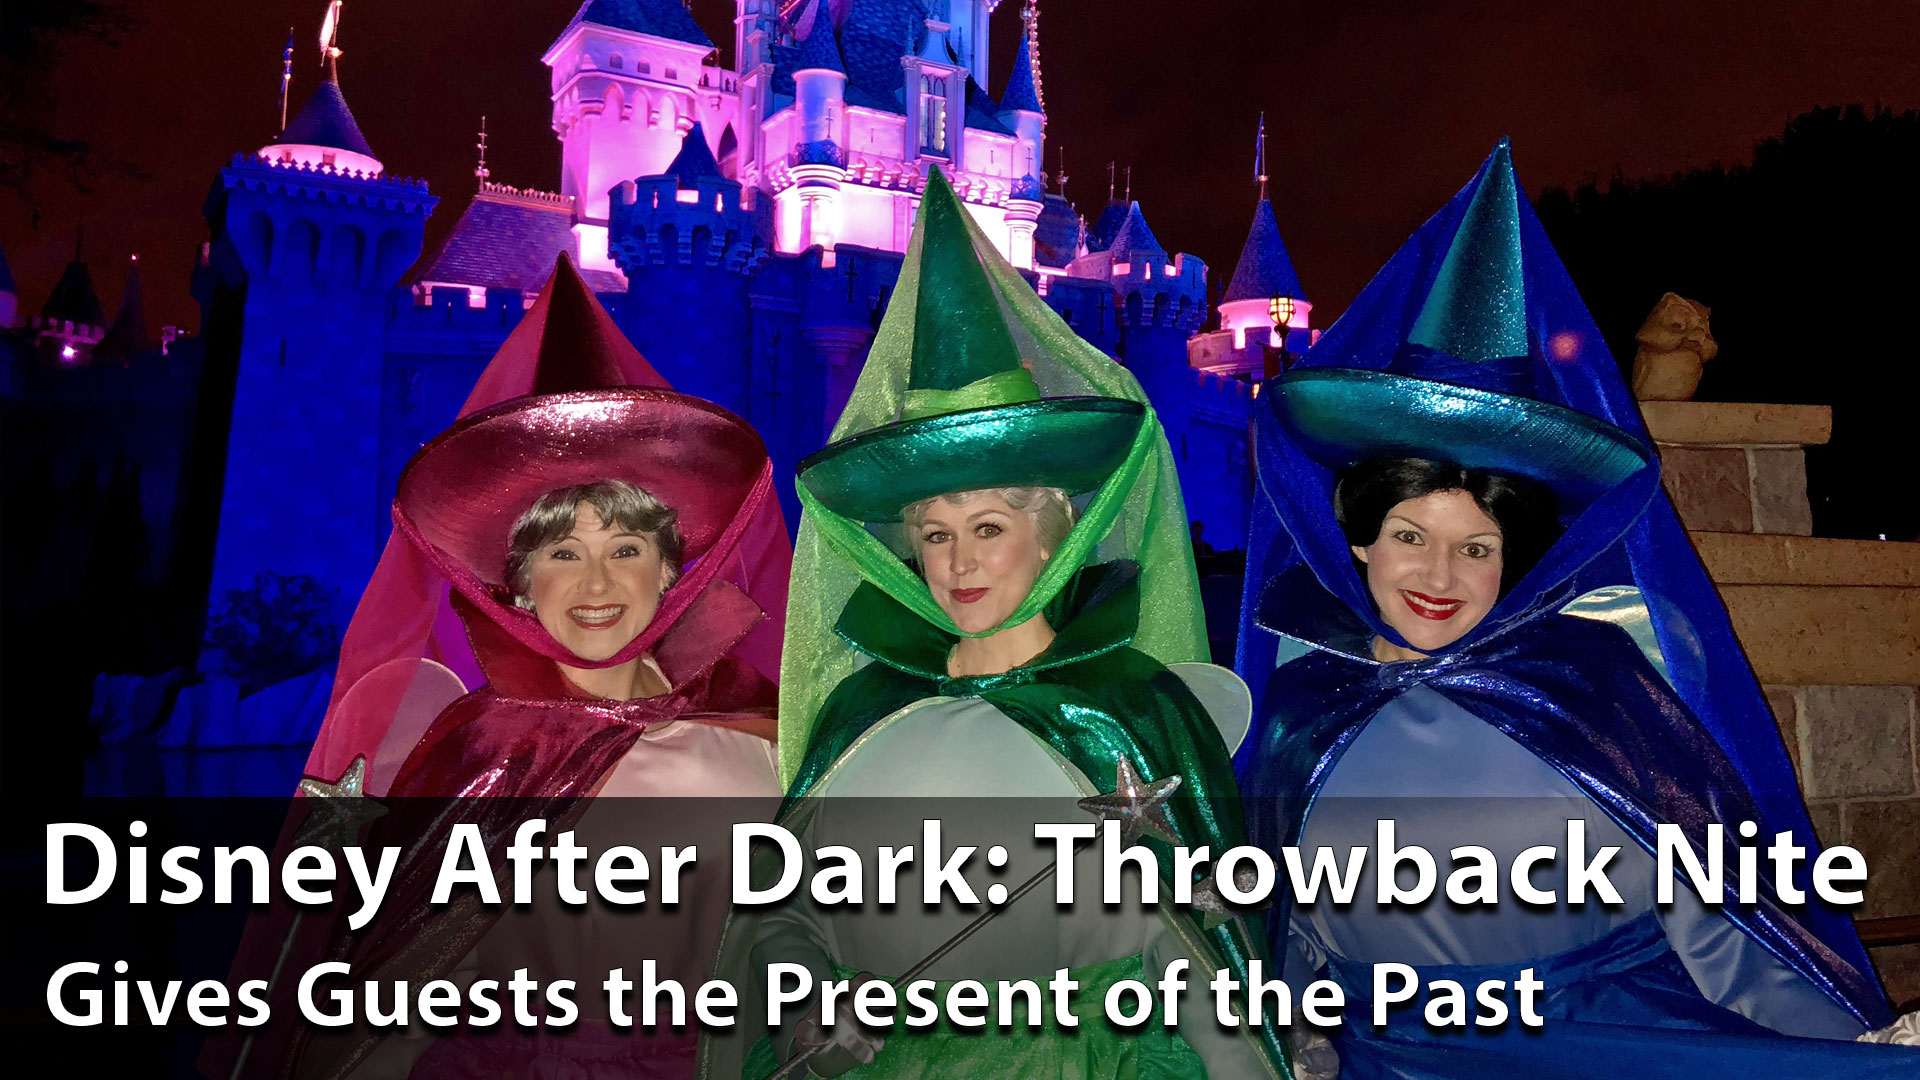 Disney After Dark: Throwback Nite Gives Guests the Present of the Past